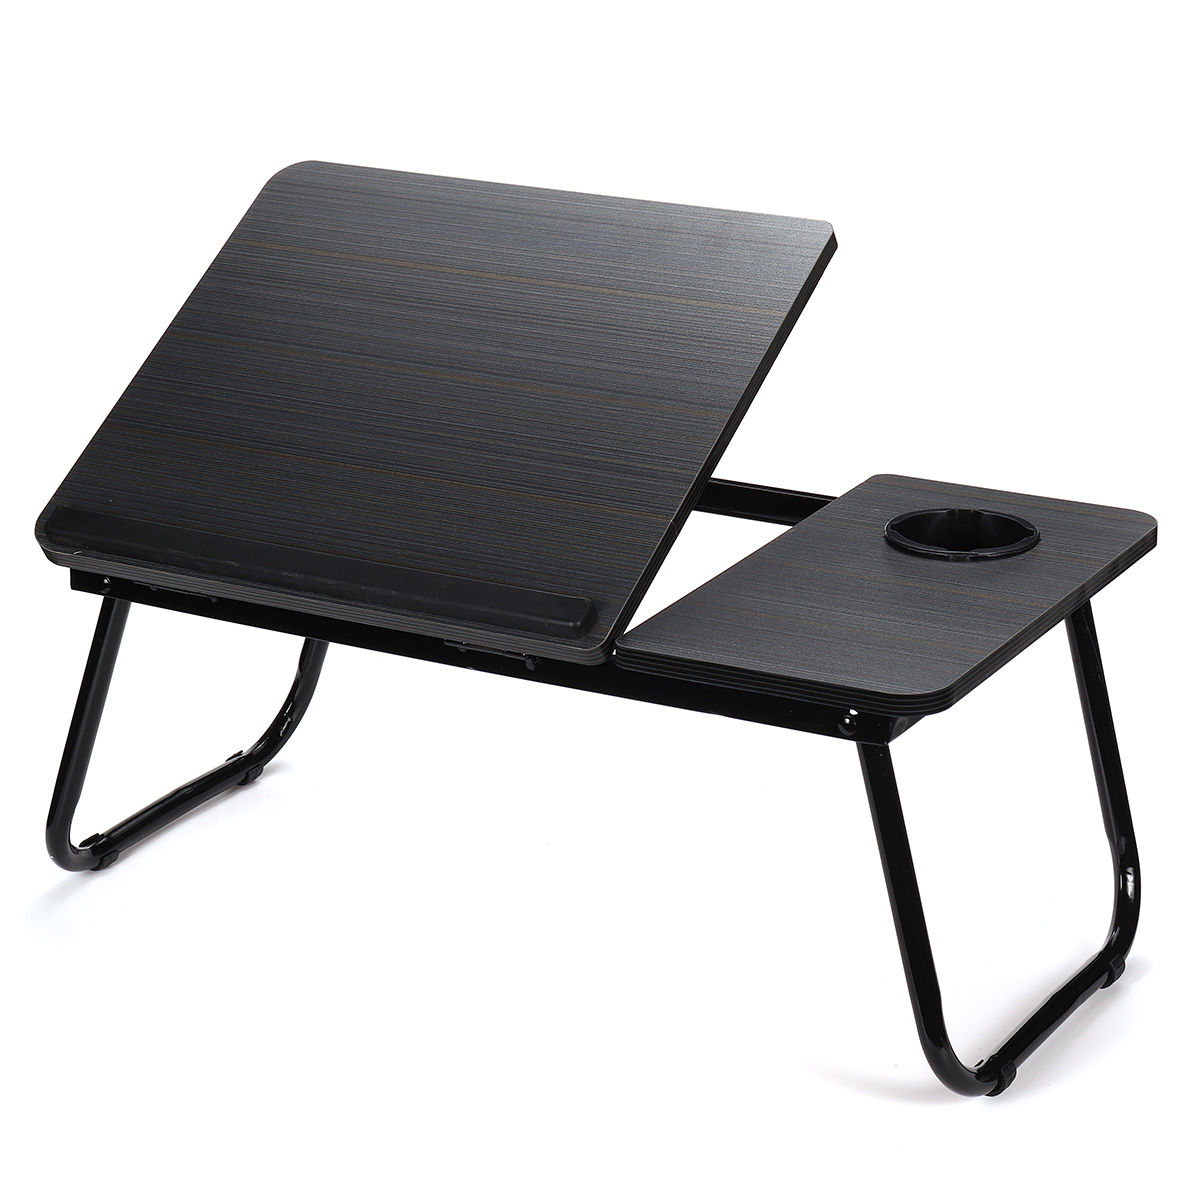 Liftable-Folding-Computer-Desk-Laptop-Stand-4-Heights-Adjustable-with-Cup-Holder-Lap-Bed-Table-Tray--1783876-7